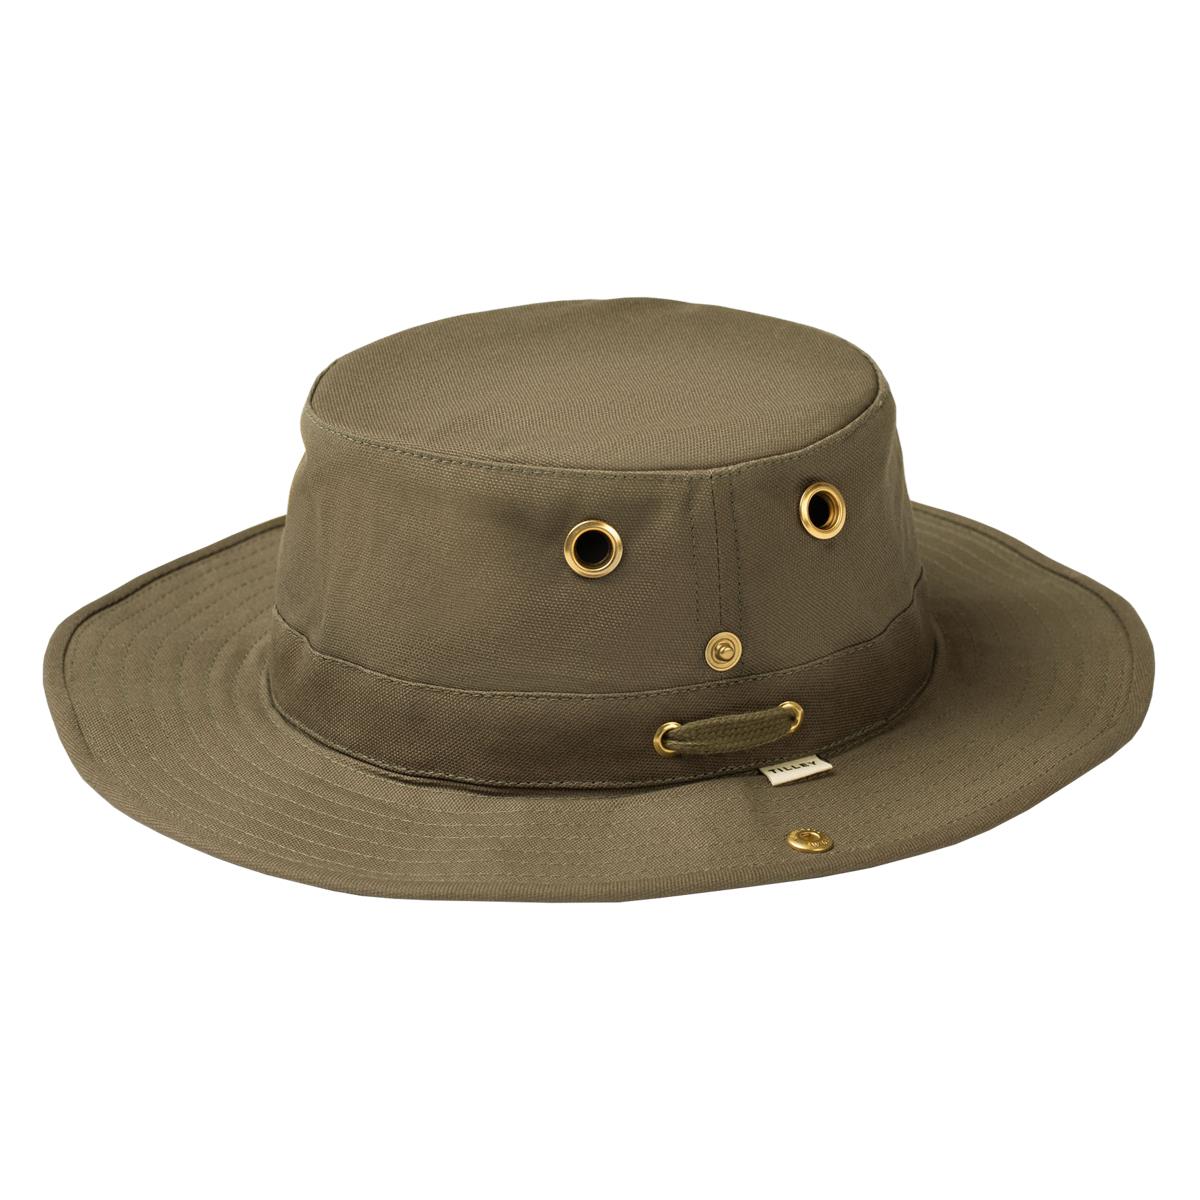 What colors and sizes does the Tilley hemp hat come in?